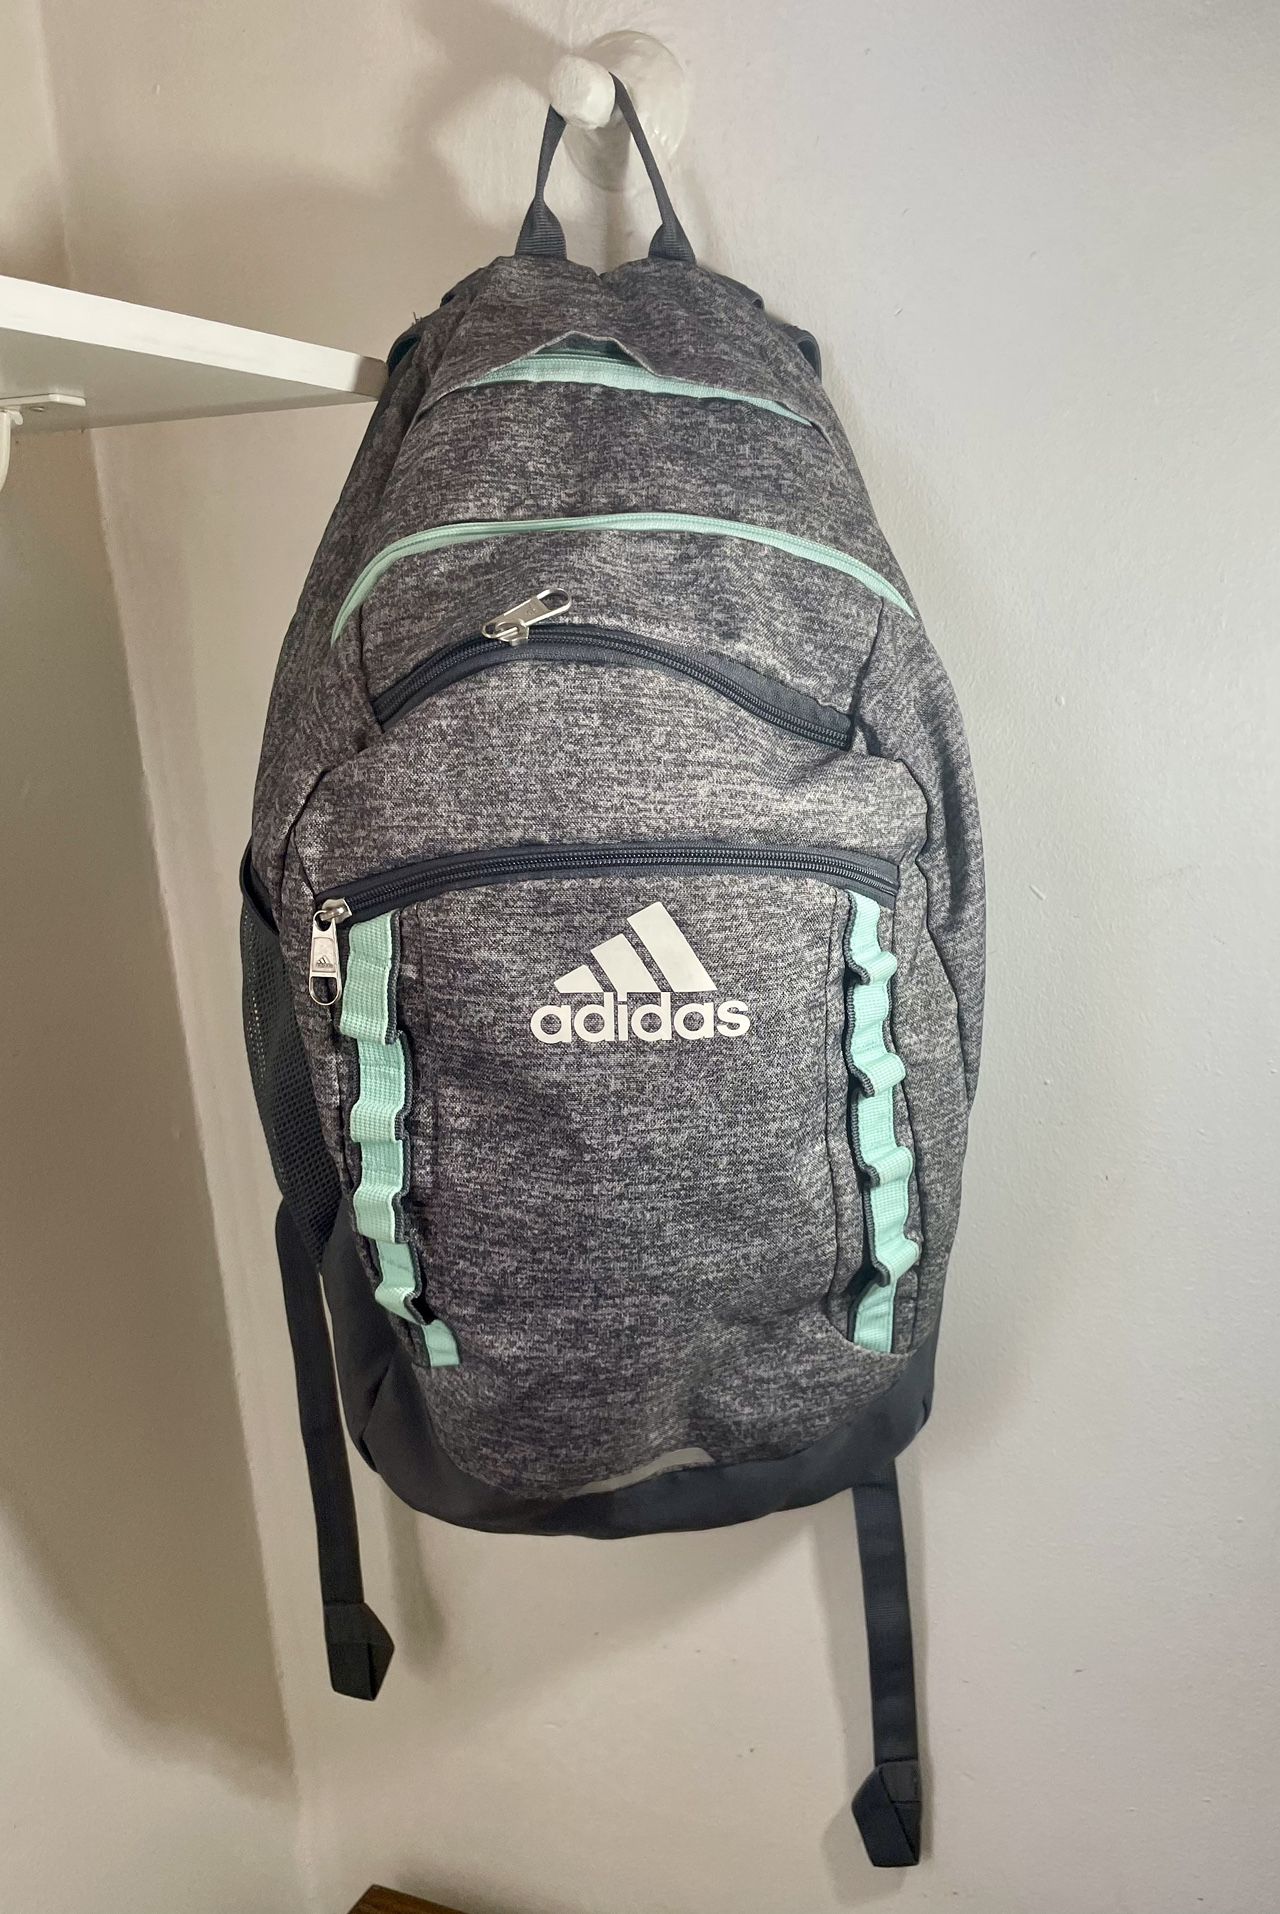 Adidas Gray and Teal Backpack